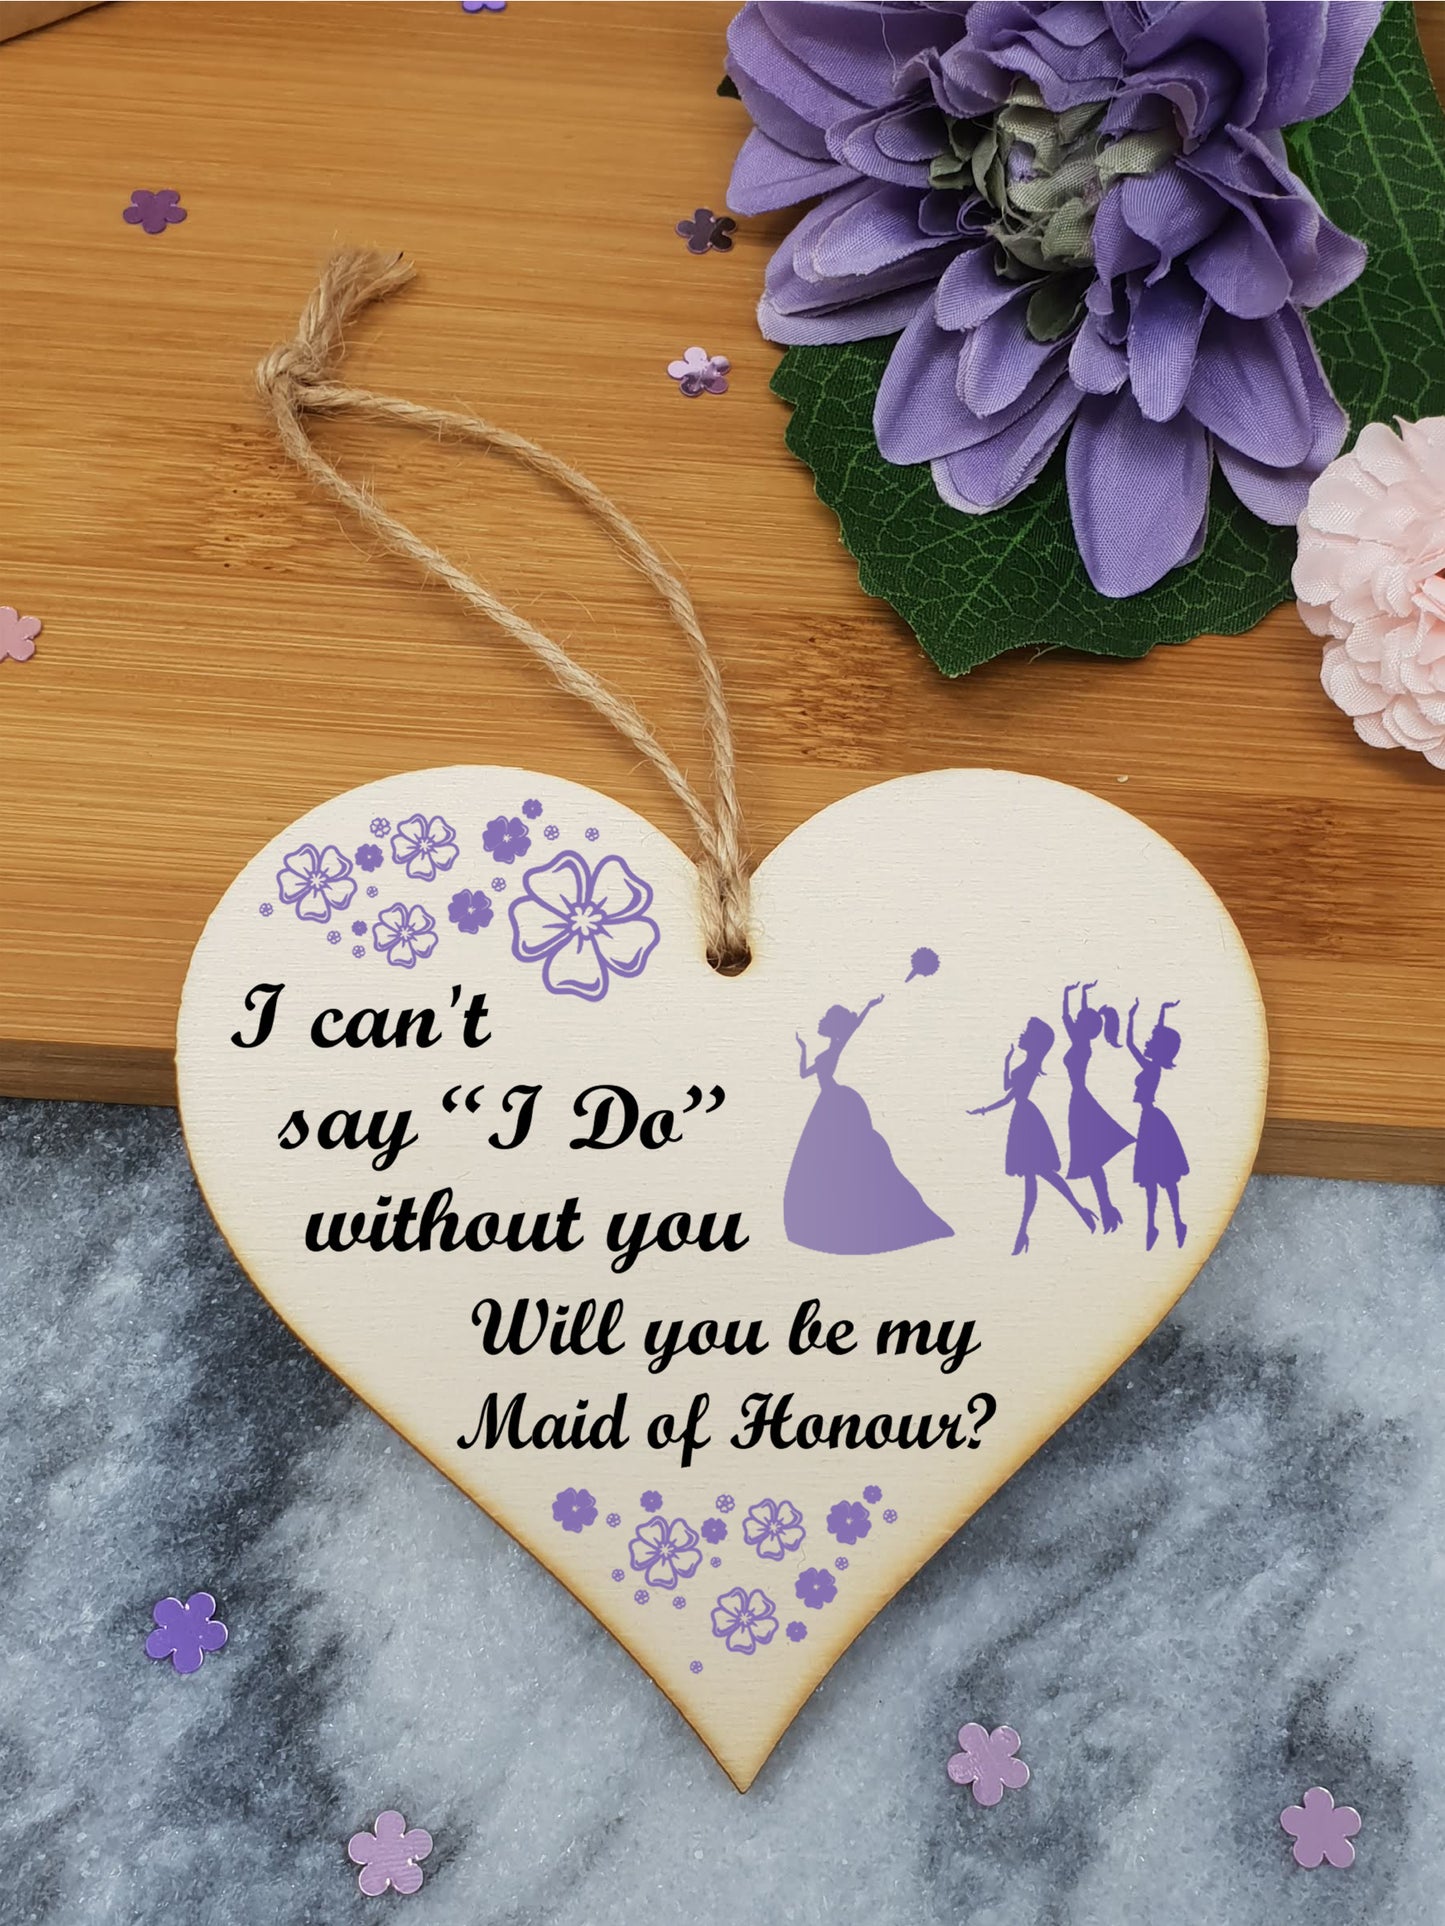 Handmade Wooden Hanging Heart Plaque Gift Will You Be My Maid of Honour Wedding Novelty Keepsake